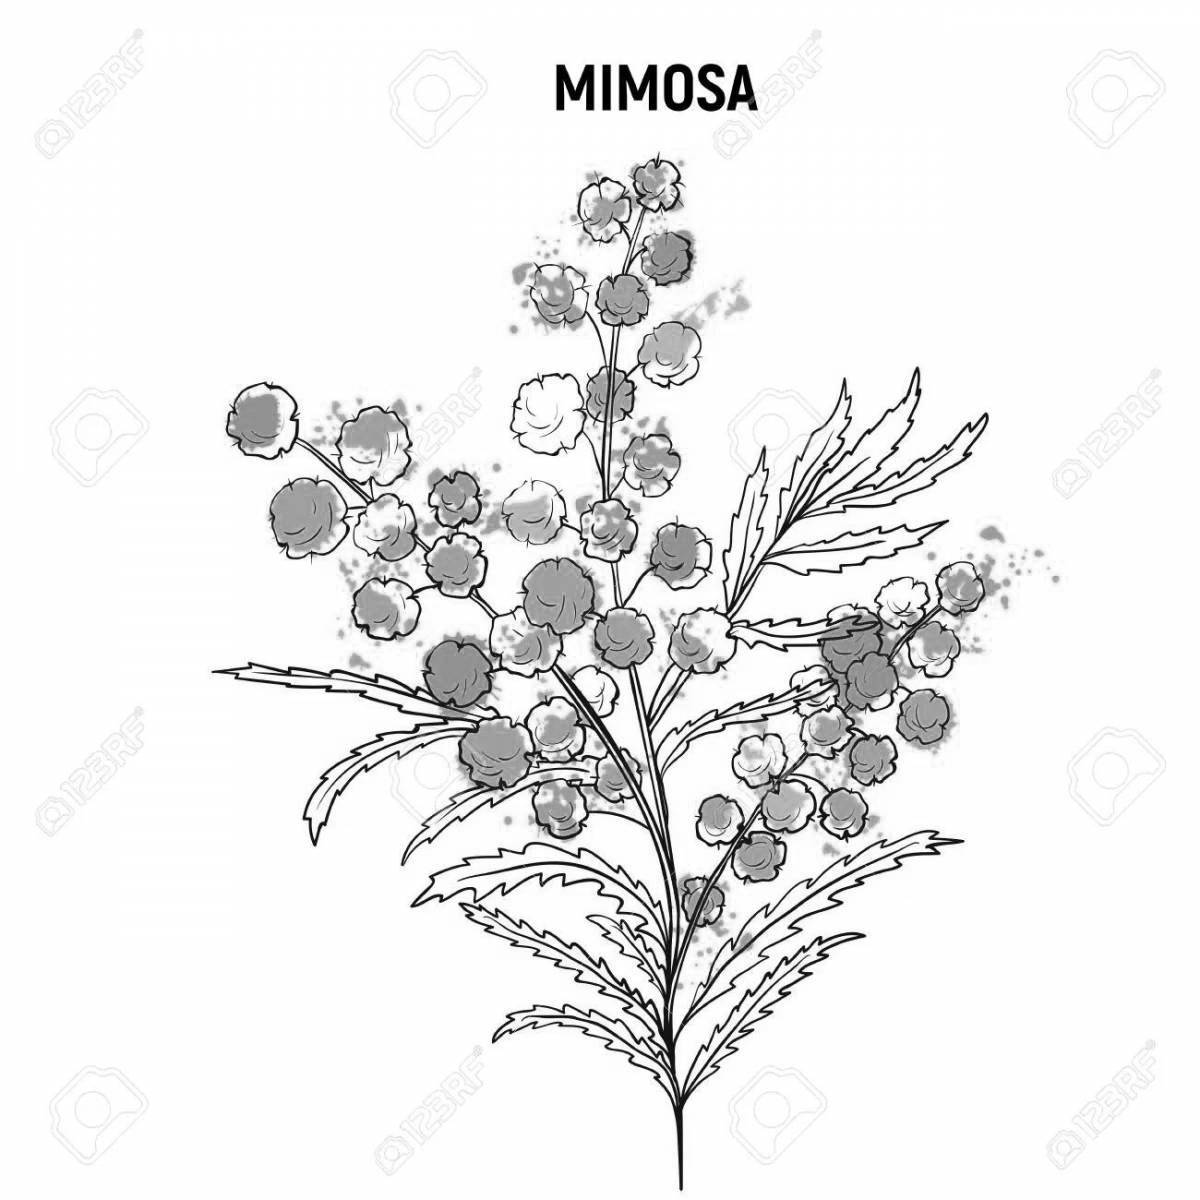 Shining mimosa coloring book for kids